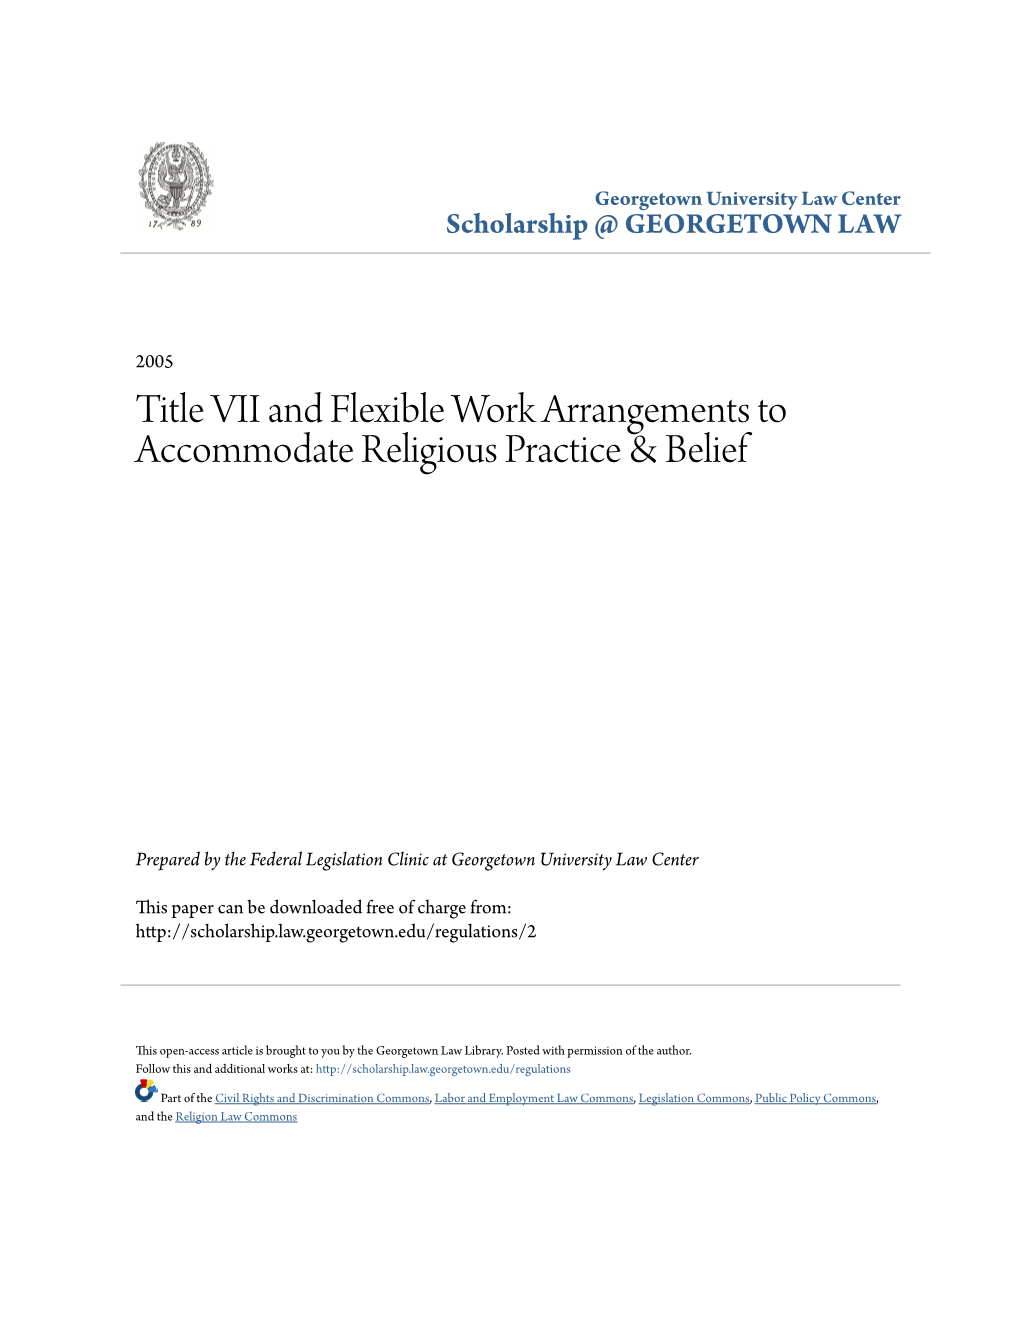 Title VII and Flexible Work Arrangements to Accommodate Religious Practice & Belief